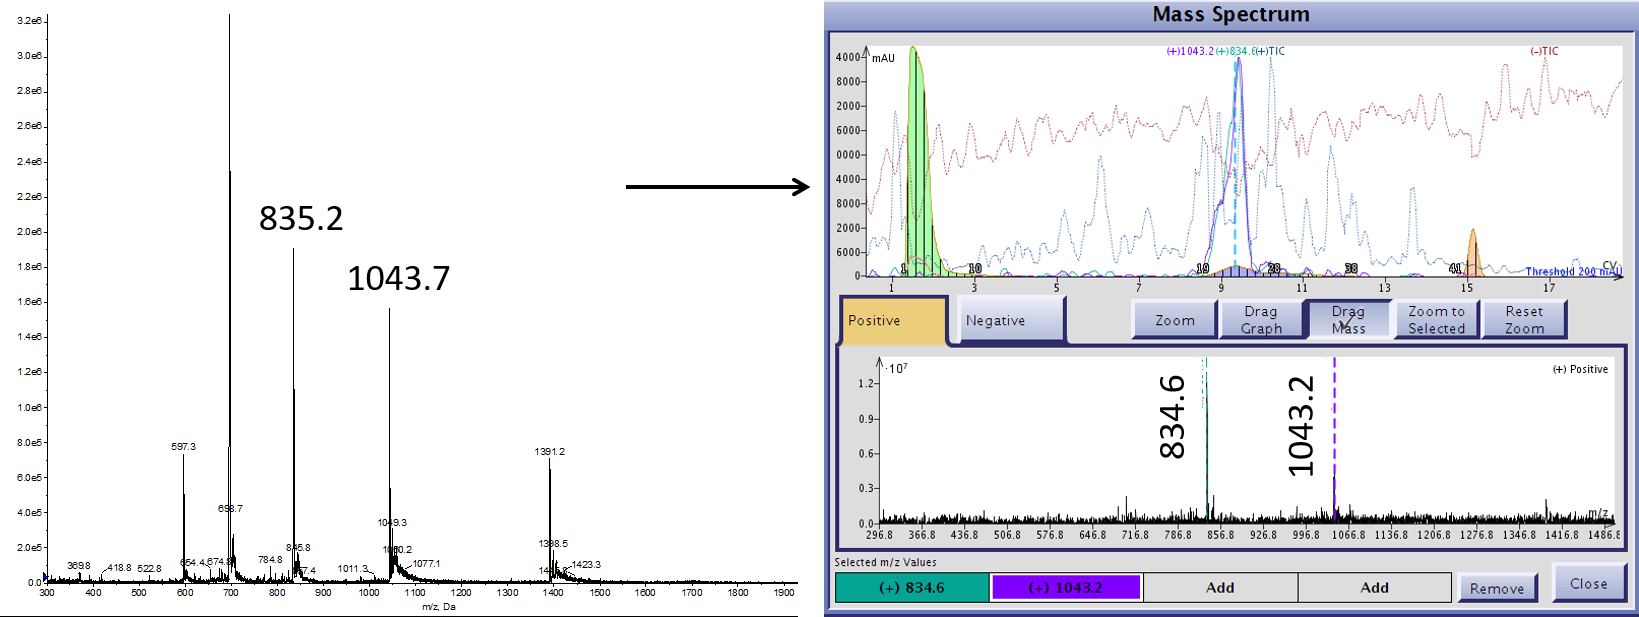 Follow up mass analysis indicates subtle differences in the predominant mass species observed using the Isolera Dalton 2000 (right) and a more standard analytical MS (left) for the same crude peptide sample.